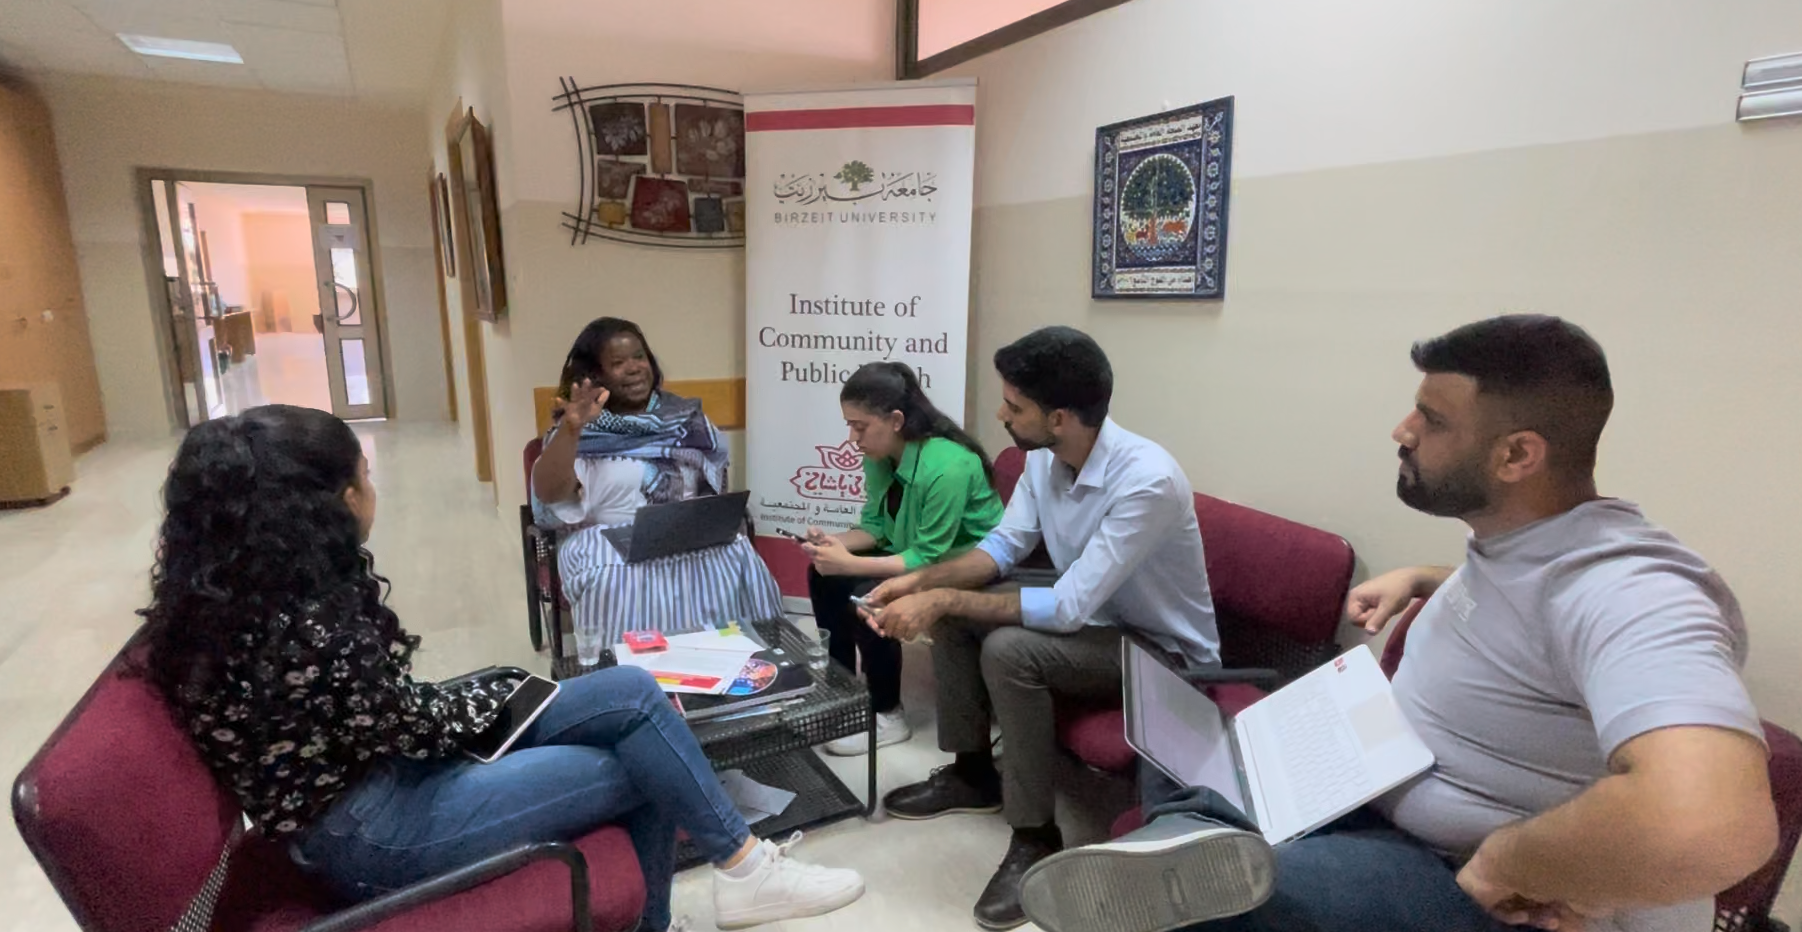 Seated woman speaking to group of four seated students in a hallway at Birzeit University Institute of Community and Public Health